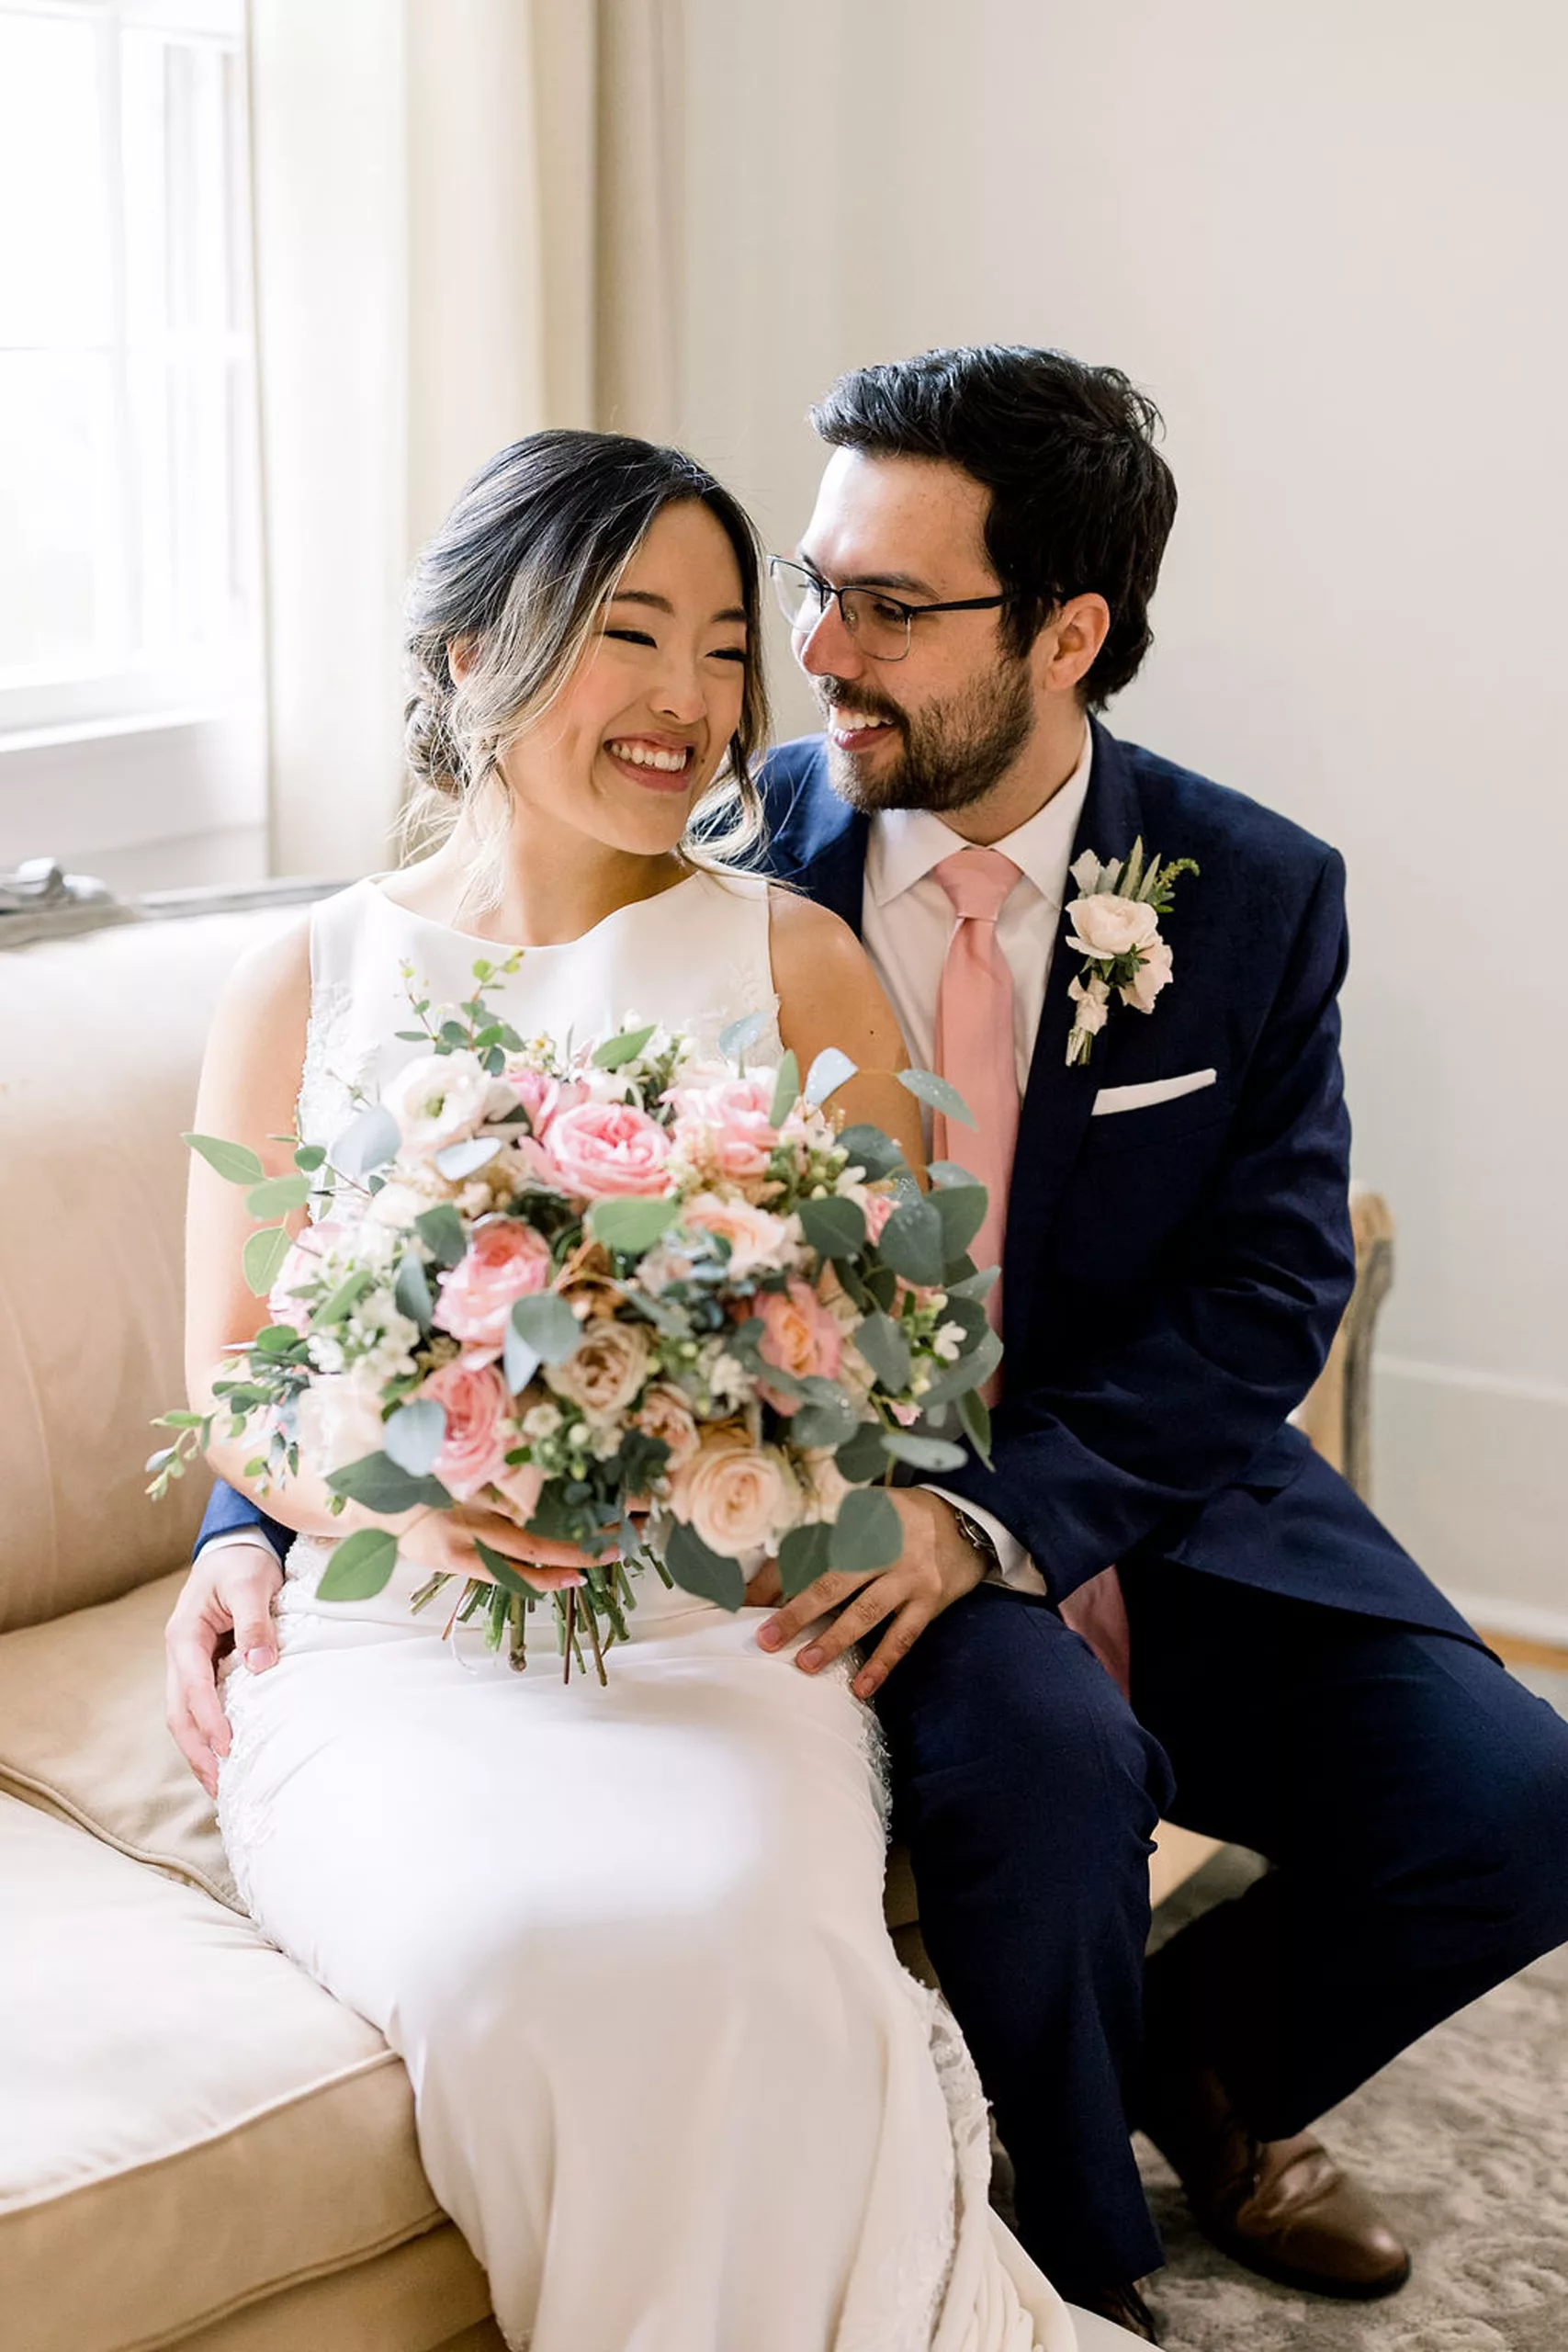 A groom in a blue suit and pink tie sits and hugs his bride on a tan couch under a window